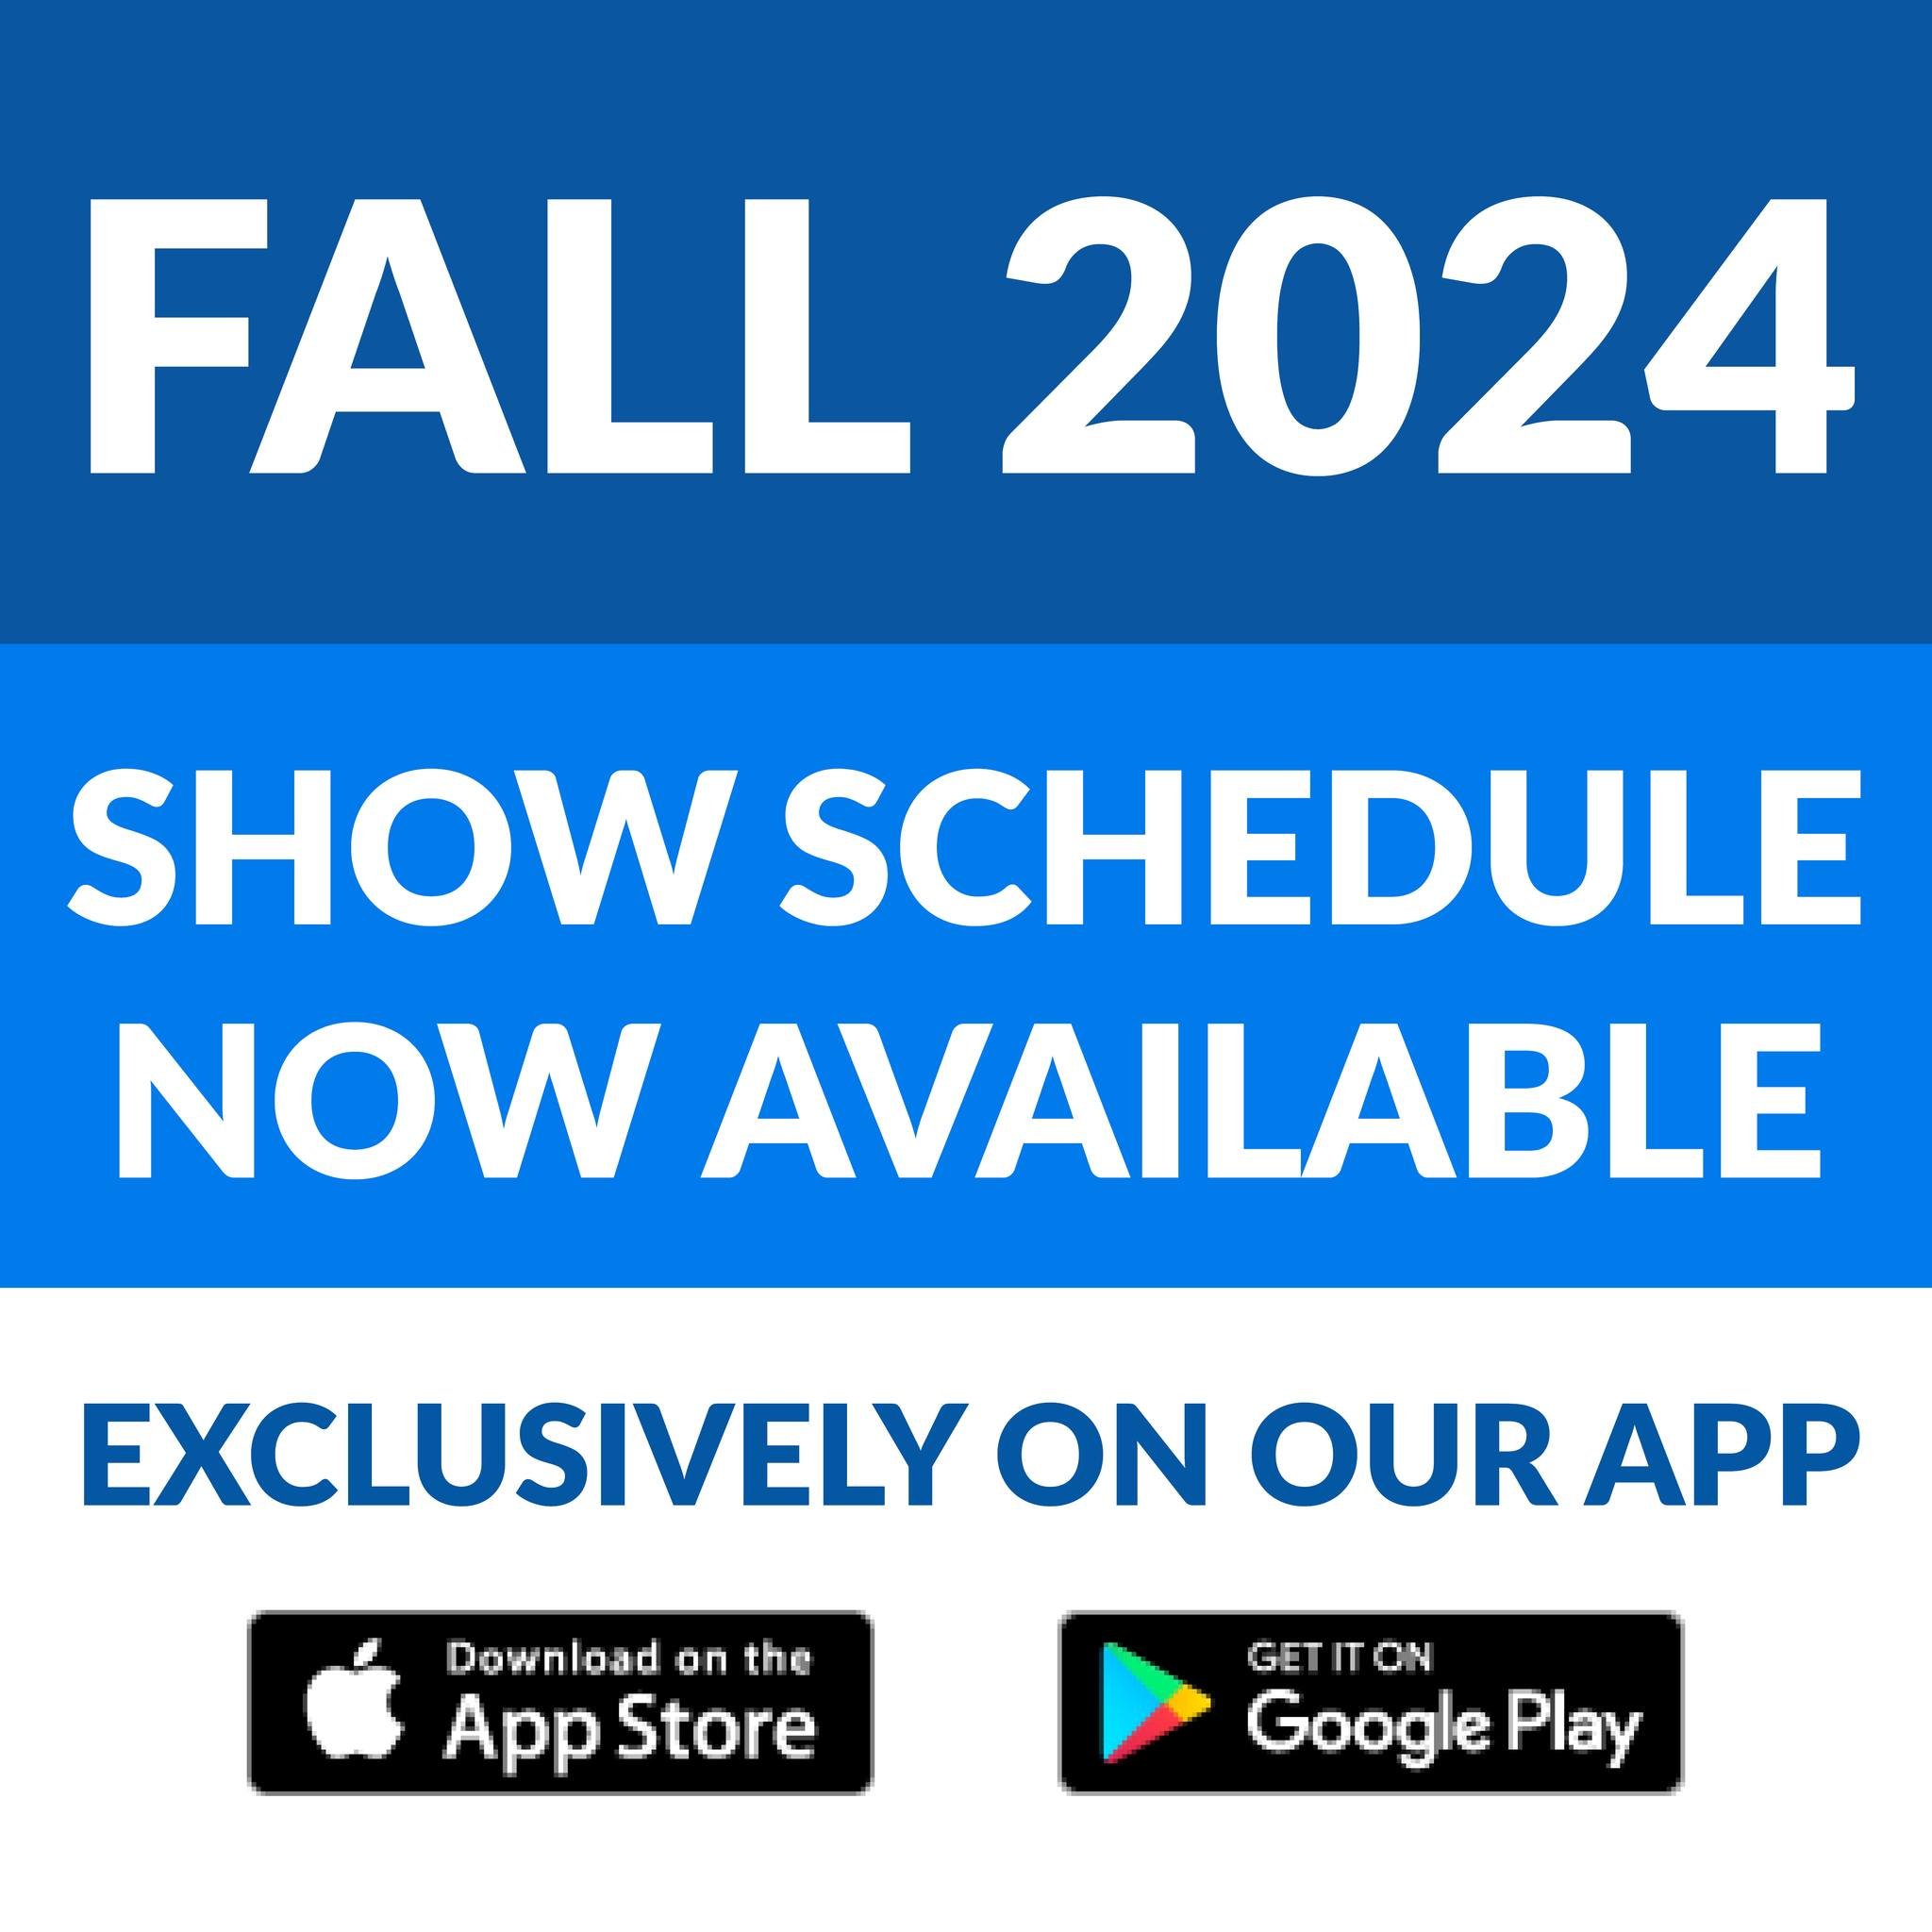 Our Fall 2024 Show Schedule Is Now Available On Our App! Download Our FREE App To See Our Full Schedule. The Website Launch Of Our Schedule Will Be Monday, May 20. Be The First To See Our Fall Show Dates And Get Notifications Straight To Your Phone W